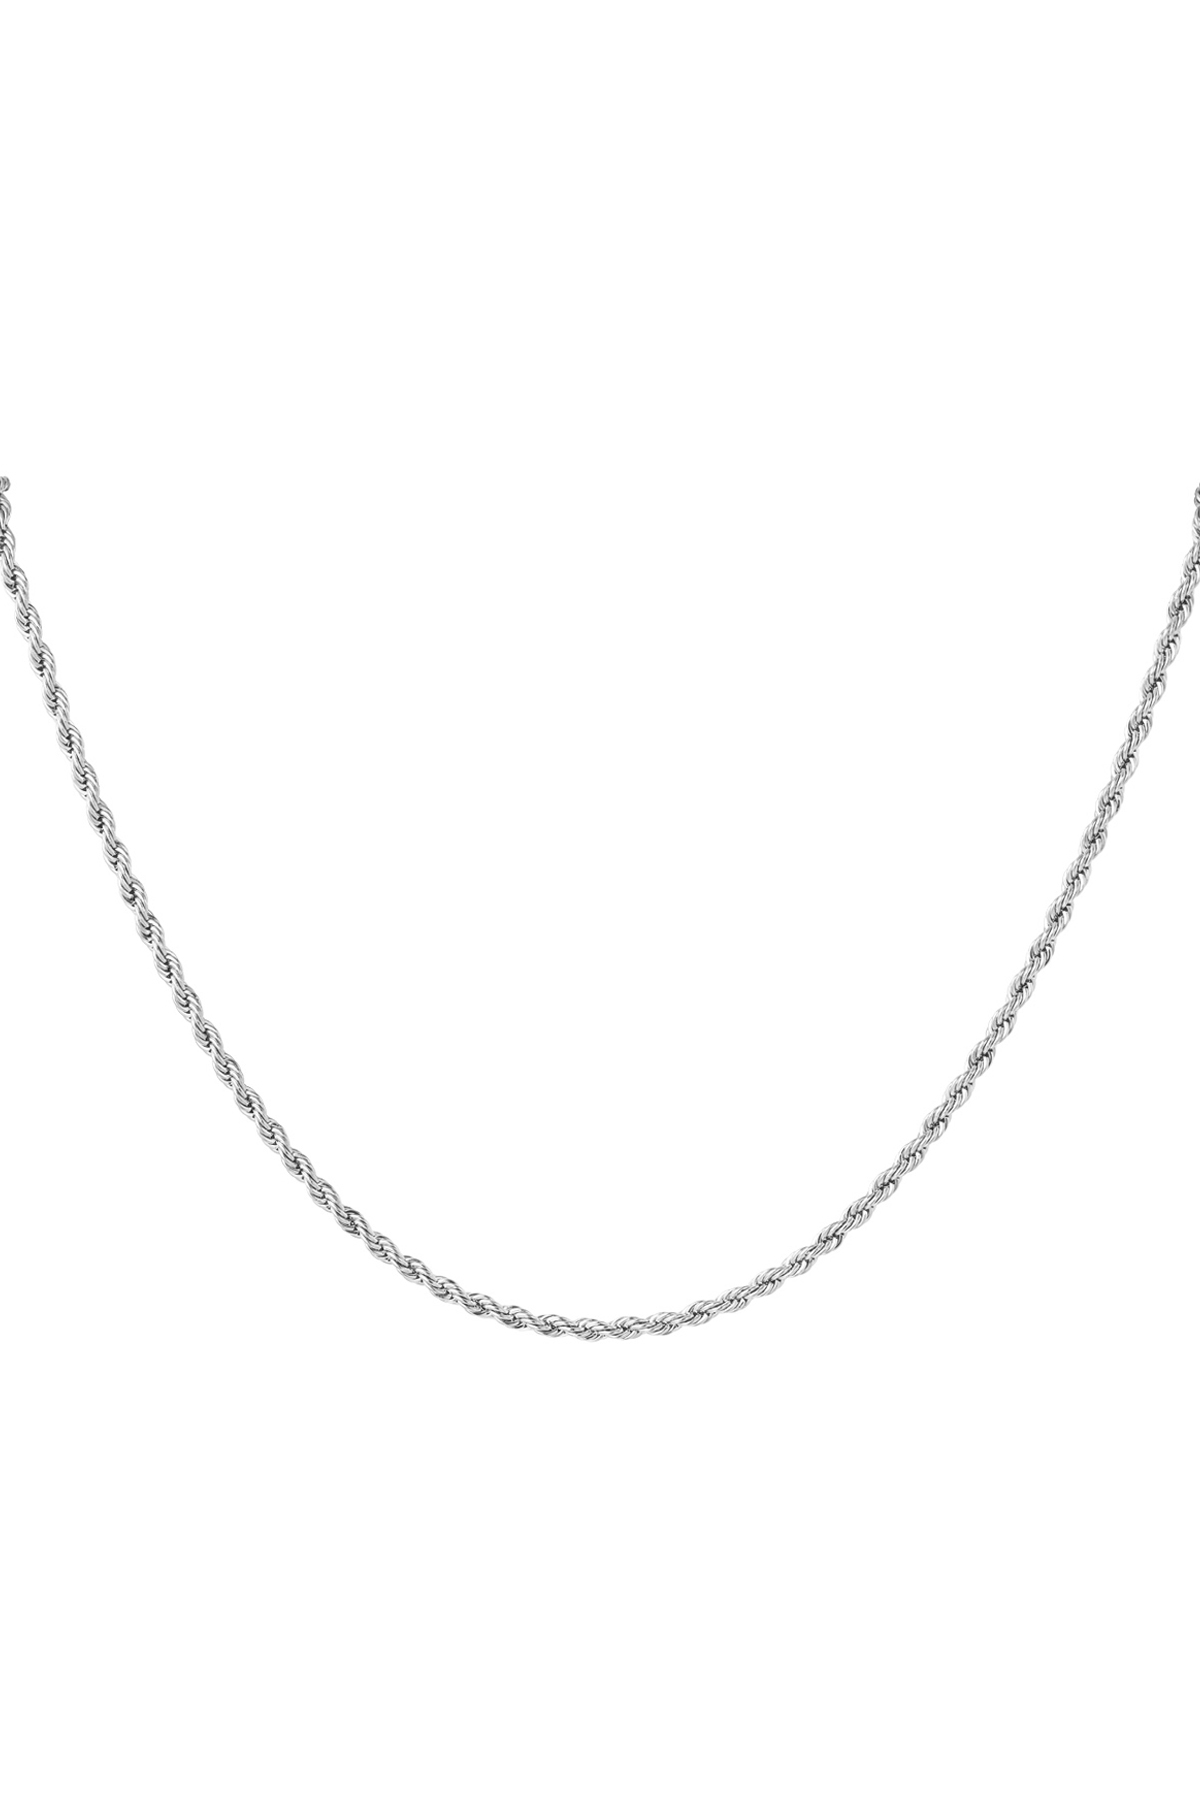 Unisex necklace twisted fine - silver